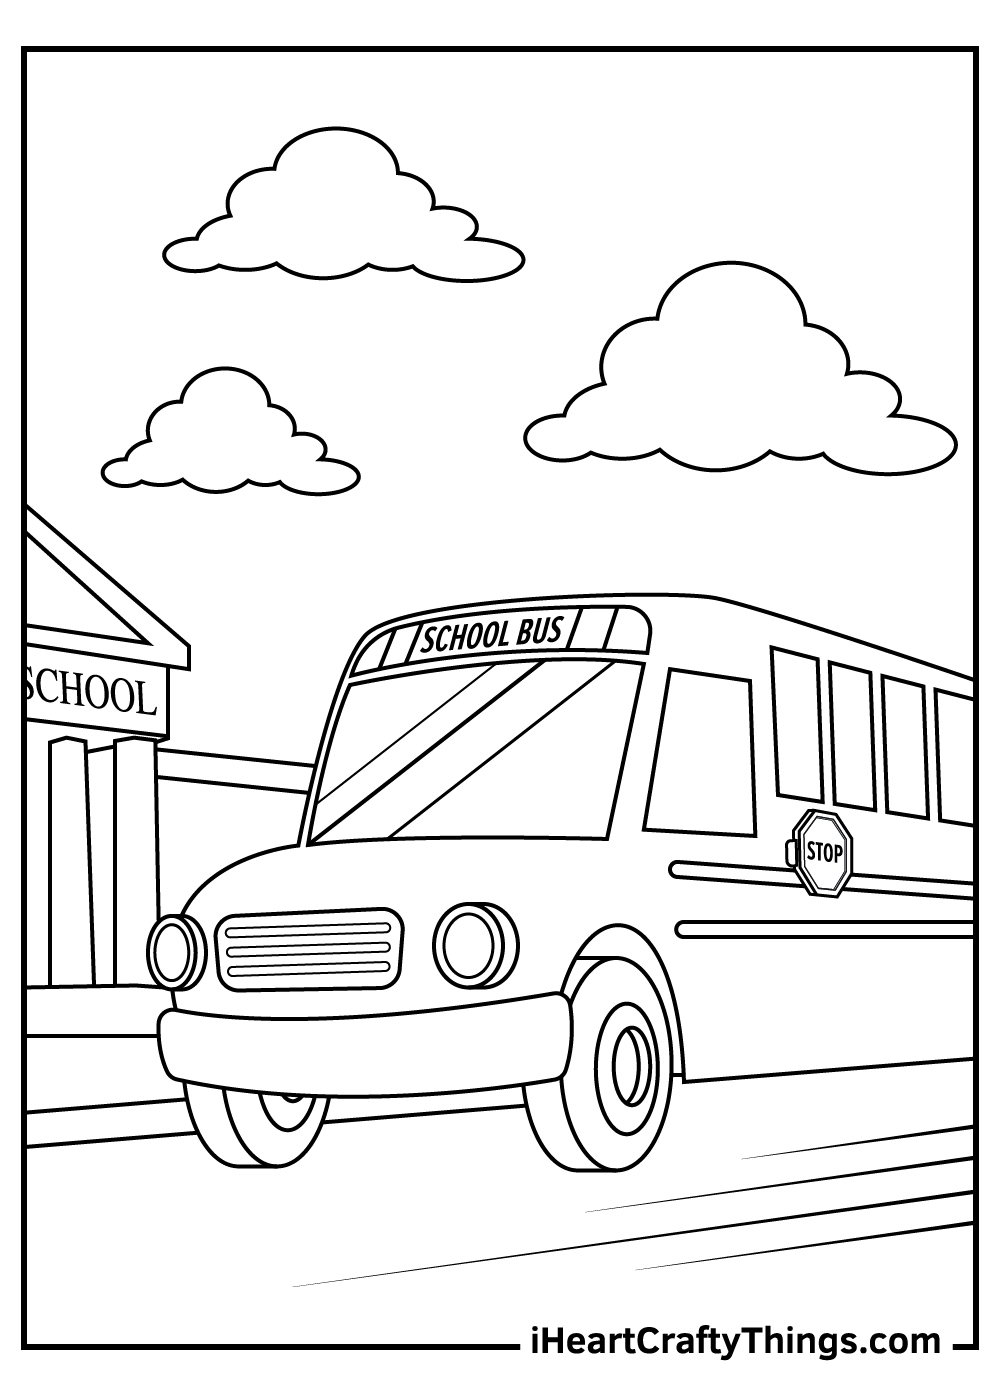 School bus coloring pages updated